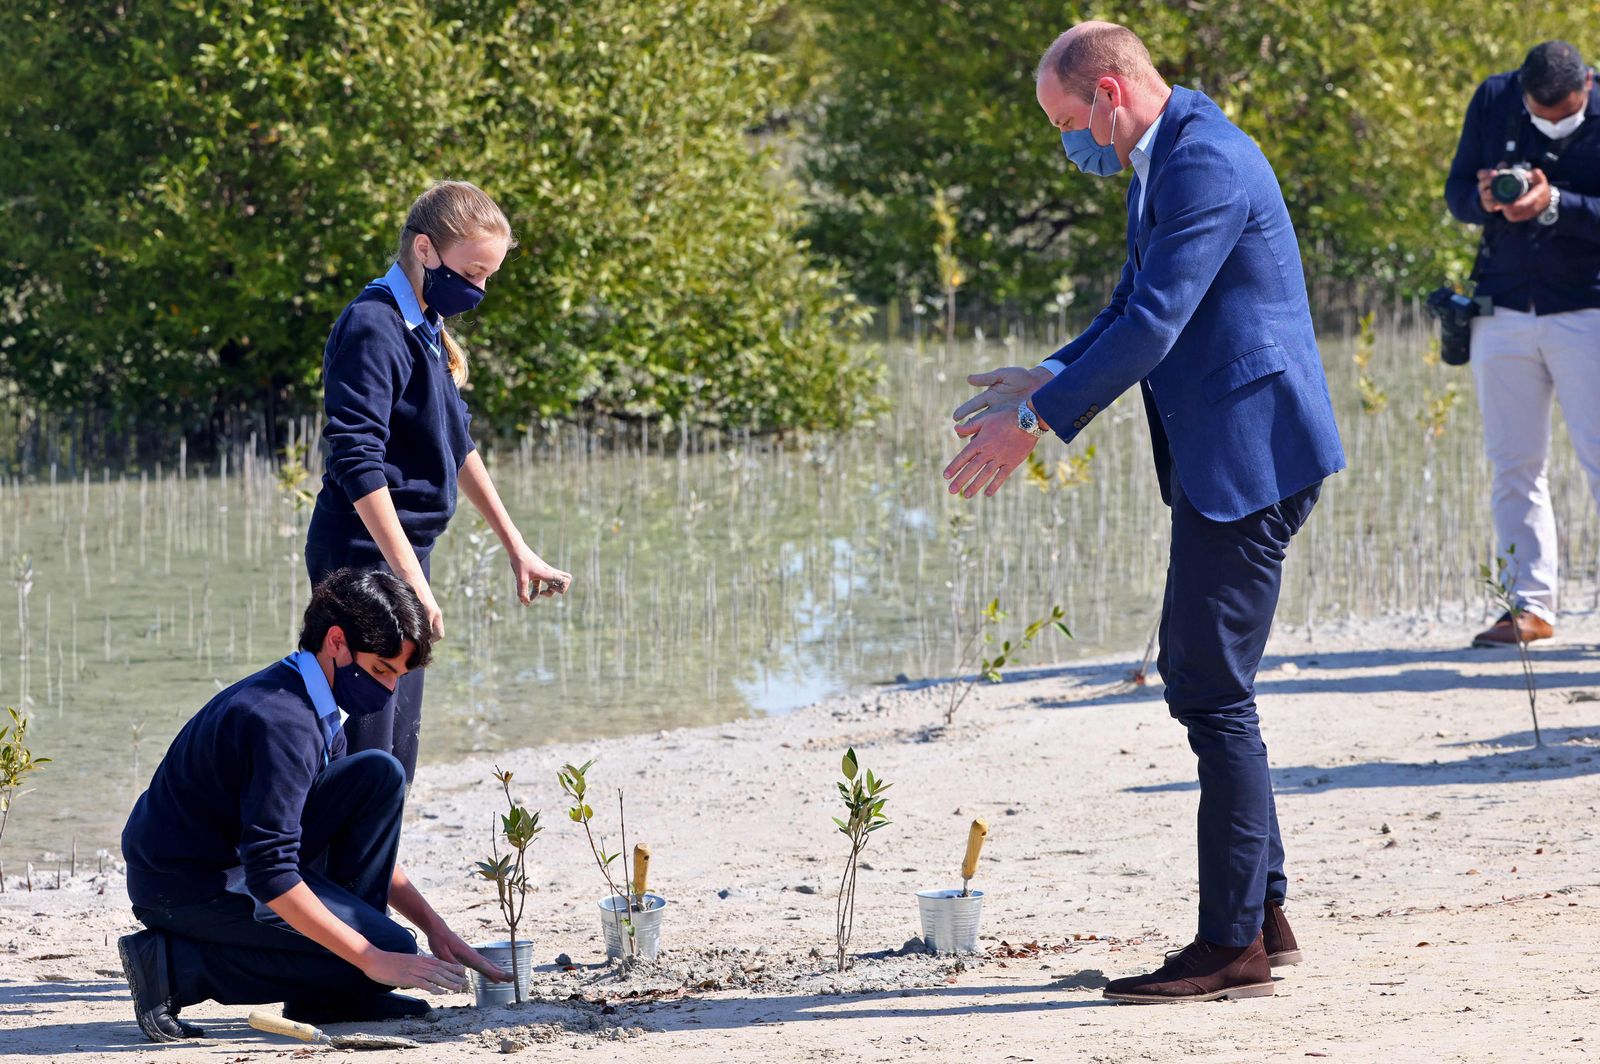 Britain's Prince William, Duke of Cambridge, plants trees alongside two school children as he tours Abu Dhabi's wetlands at the Jubail Magrove Park during an official visit to the United Arab Emirates (UAE) on February 10, 2022. - Prince William's climate-focused visit also aims to bolster ties between the two countries after the UAE, a former British protectorate, marked 50 years since its founding in 1971. (Photo by Giuseppe CACACE / AFP) - AFP